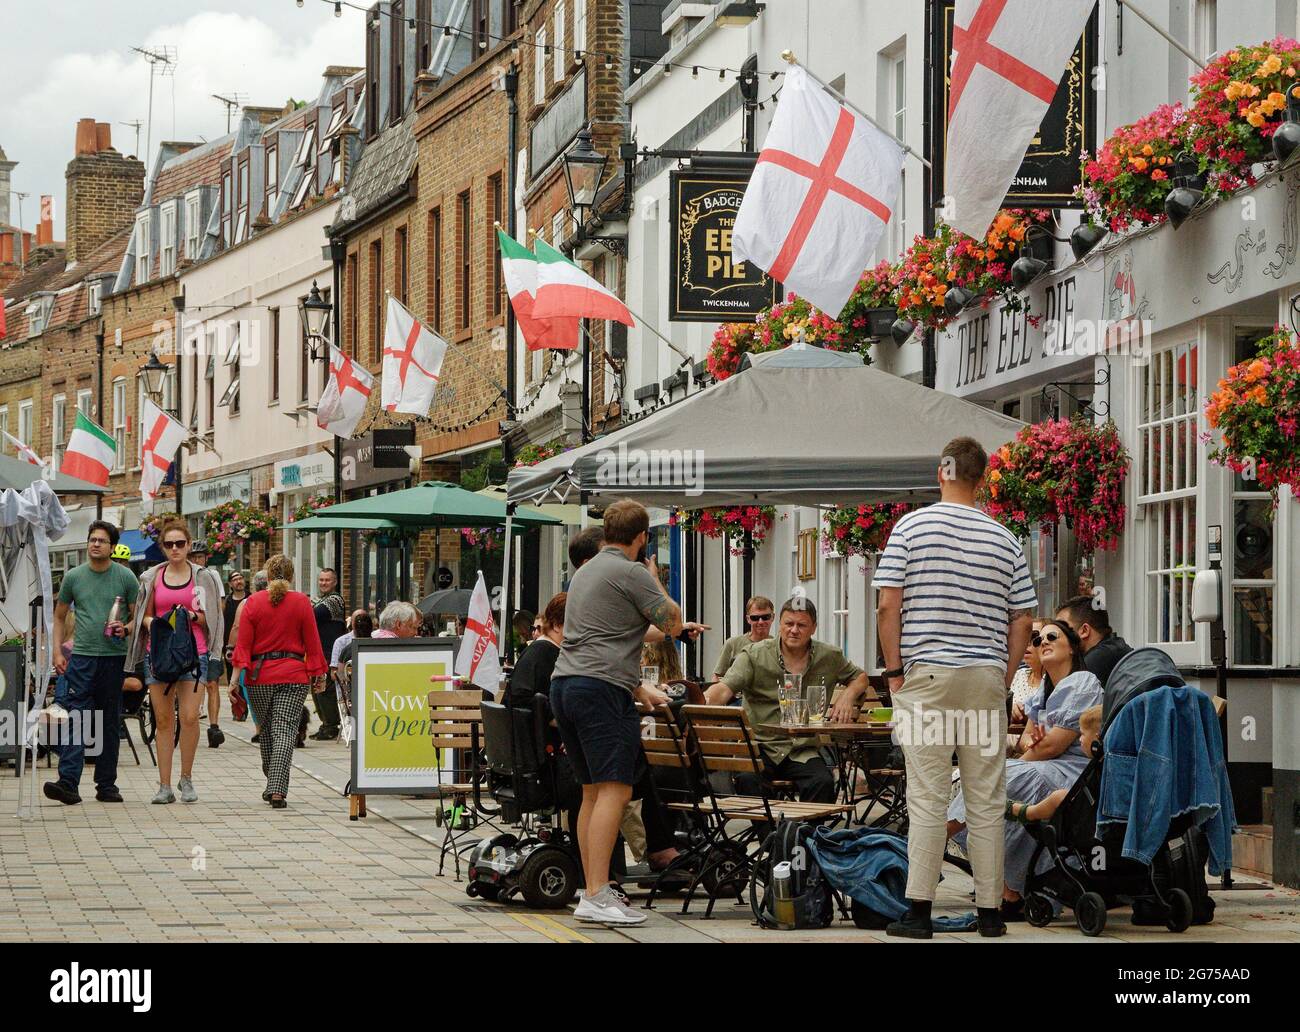 The al fresco dining and drinking in Church Street, Twickenham festooned with England flags for Euro 2020 before the final game. Stock Photo